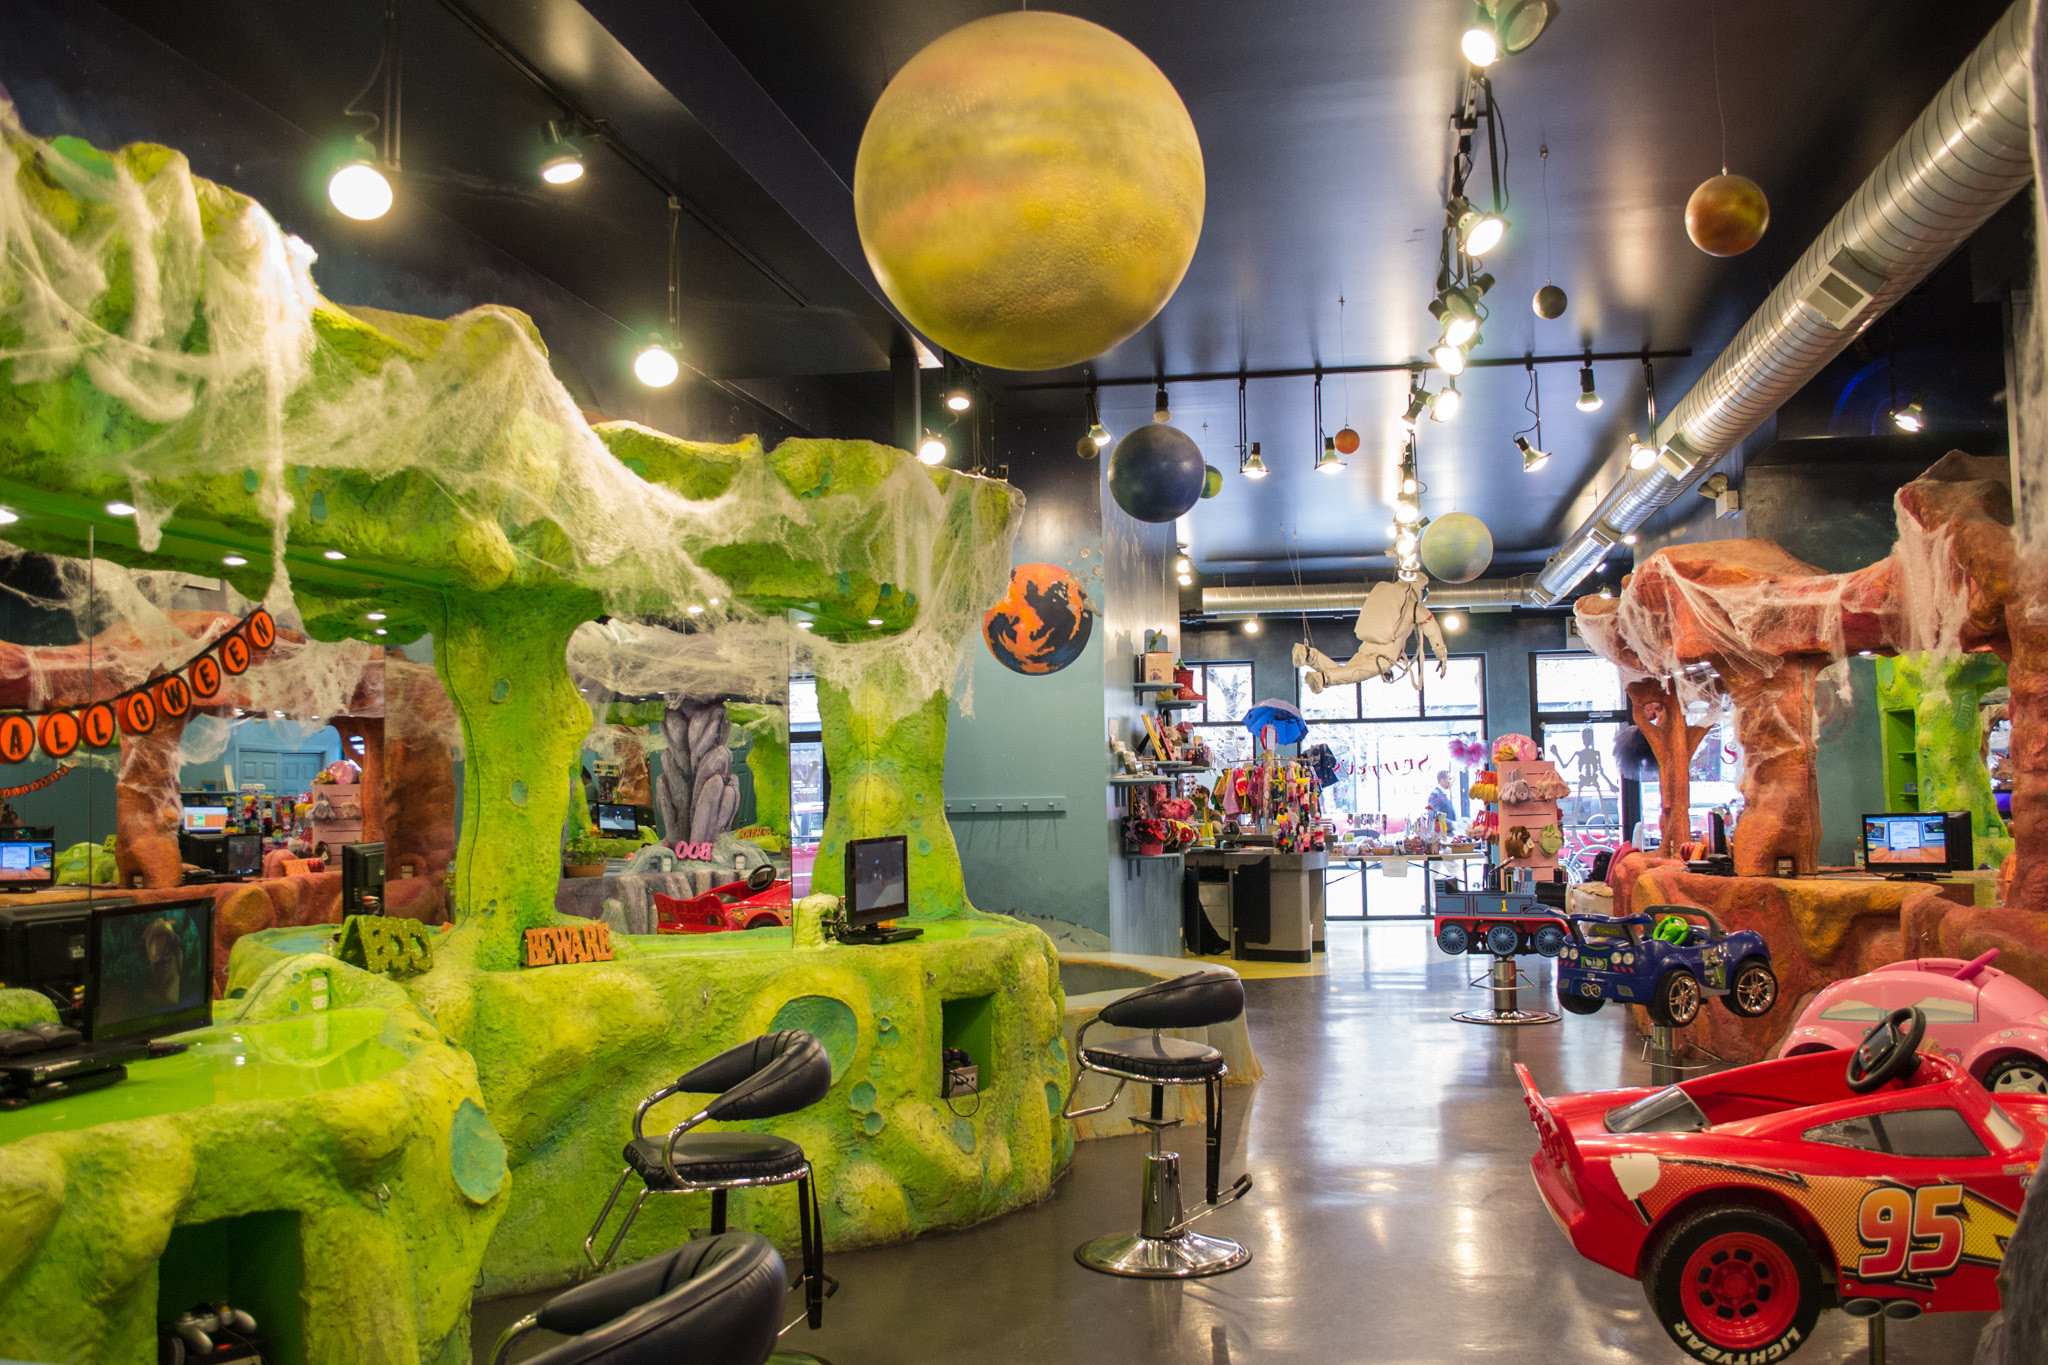 Fun Indoor Places For Kids
 Top 10 Fun Places For Kids To Visit on Holidays Around The